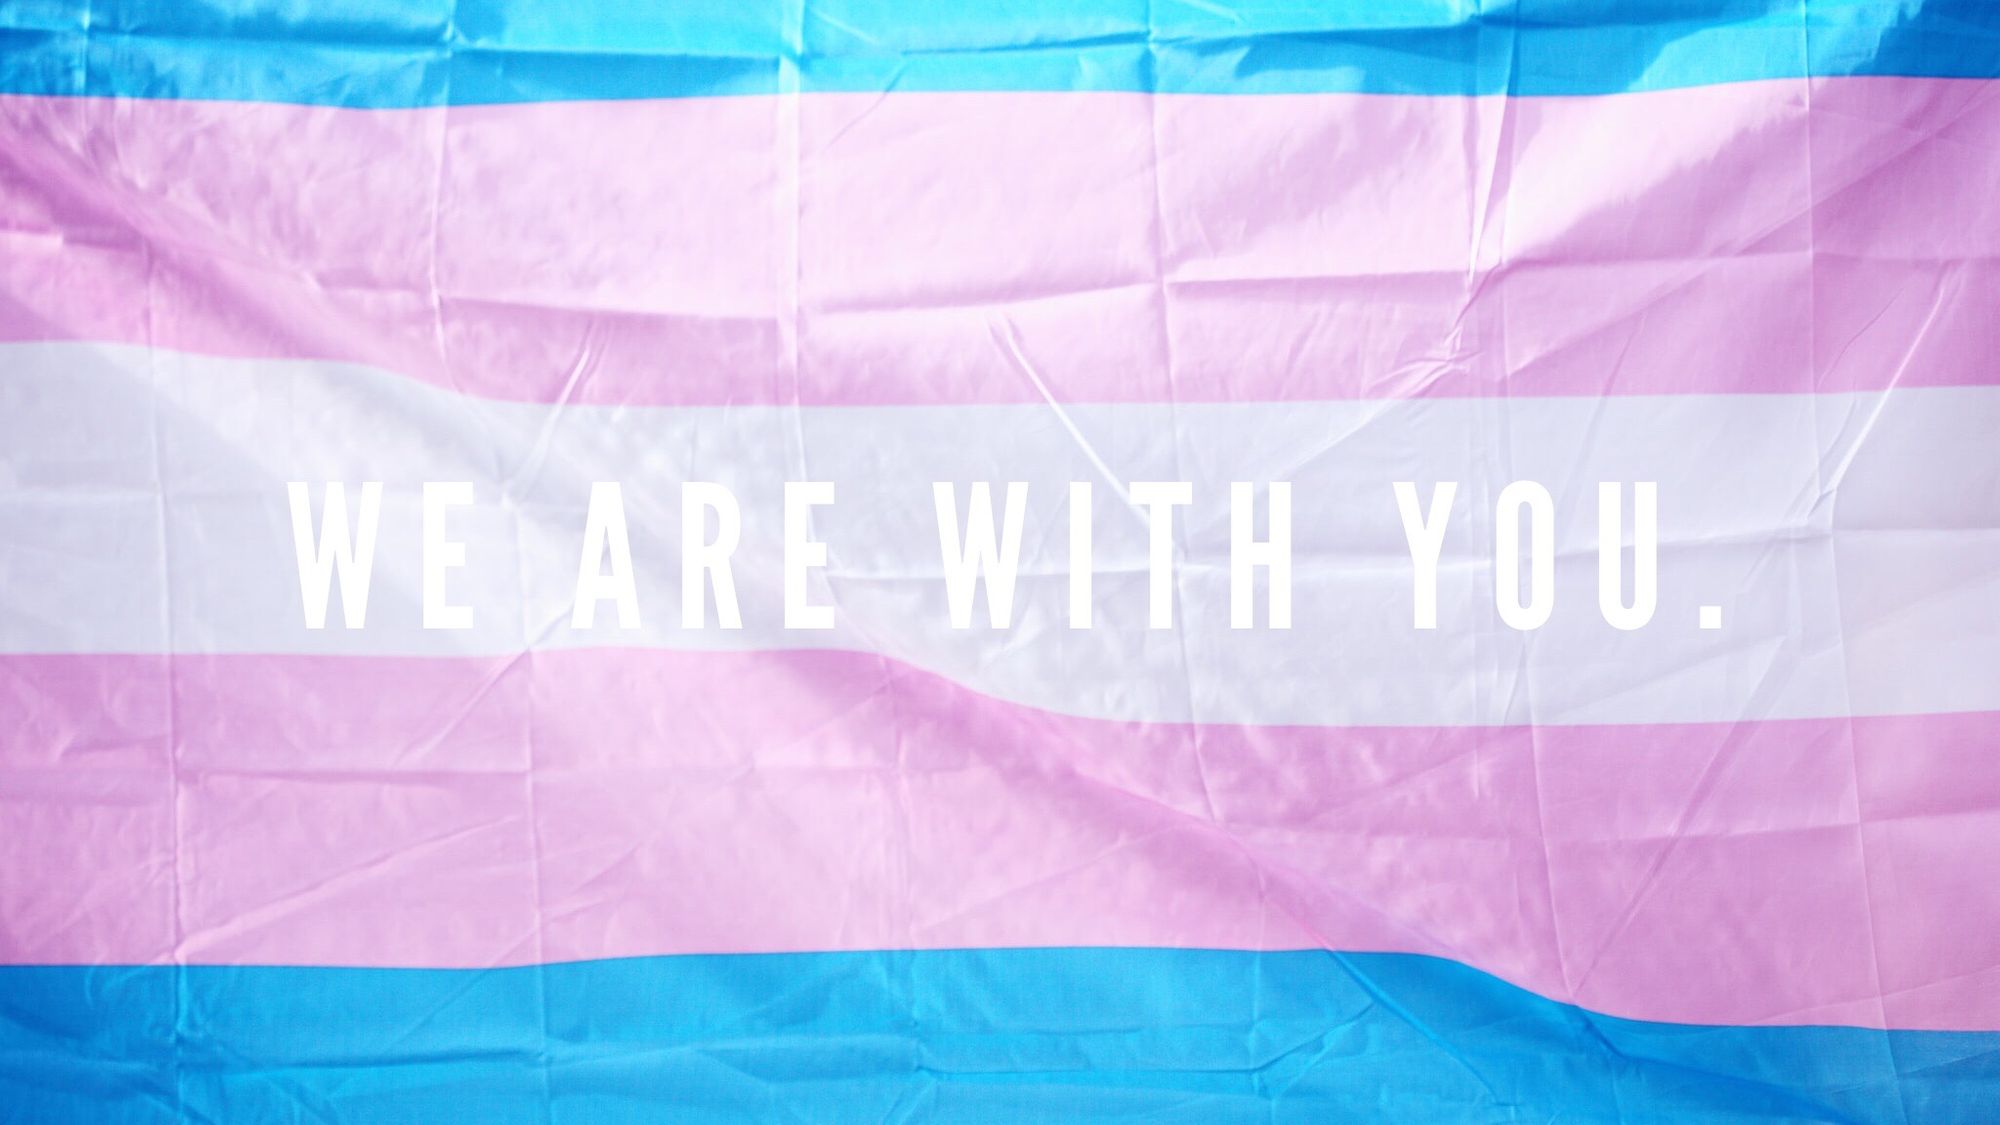 Transgender friends: We are with you.